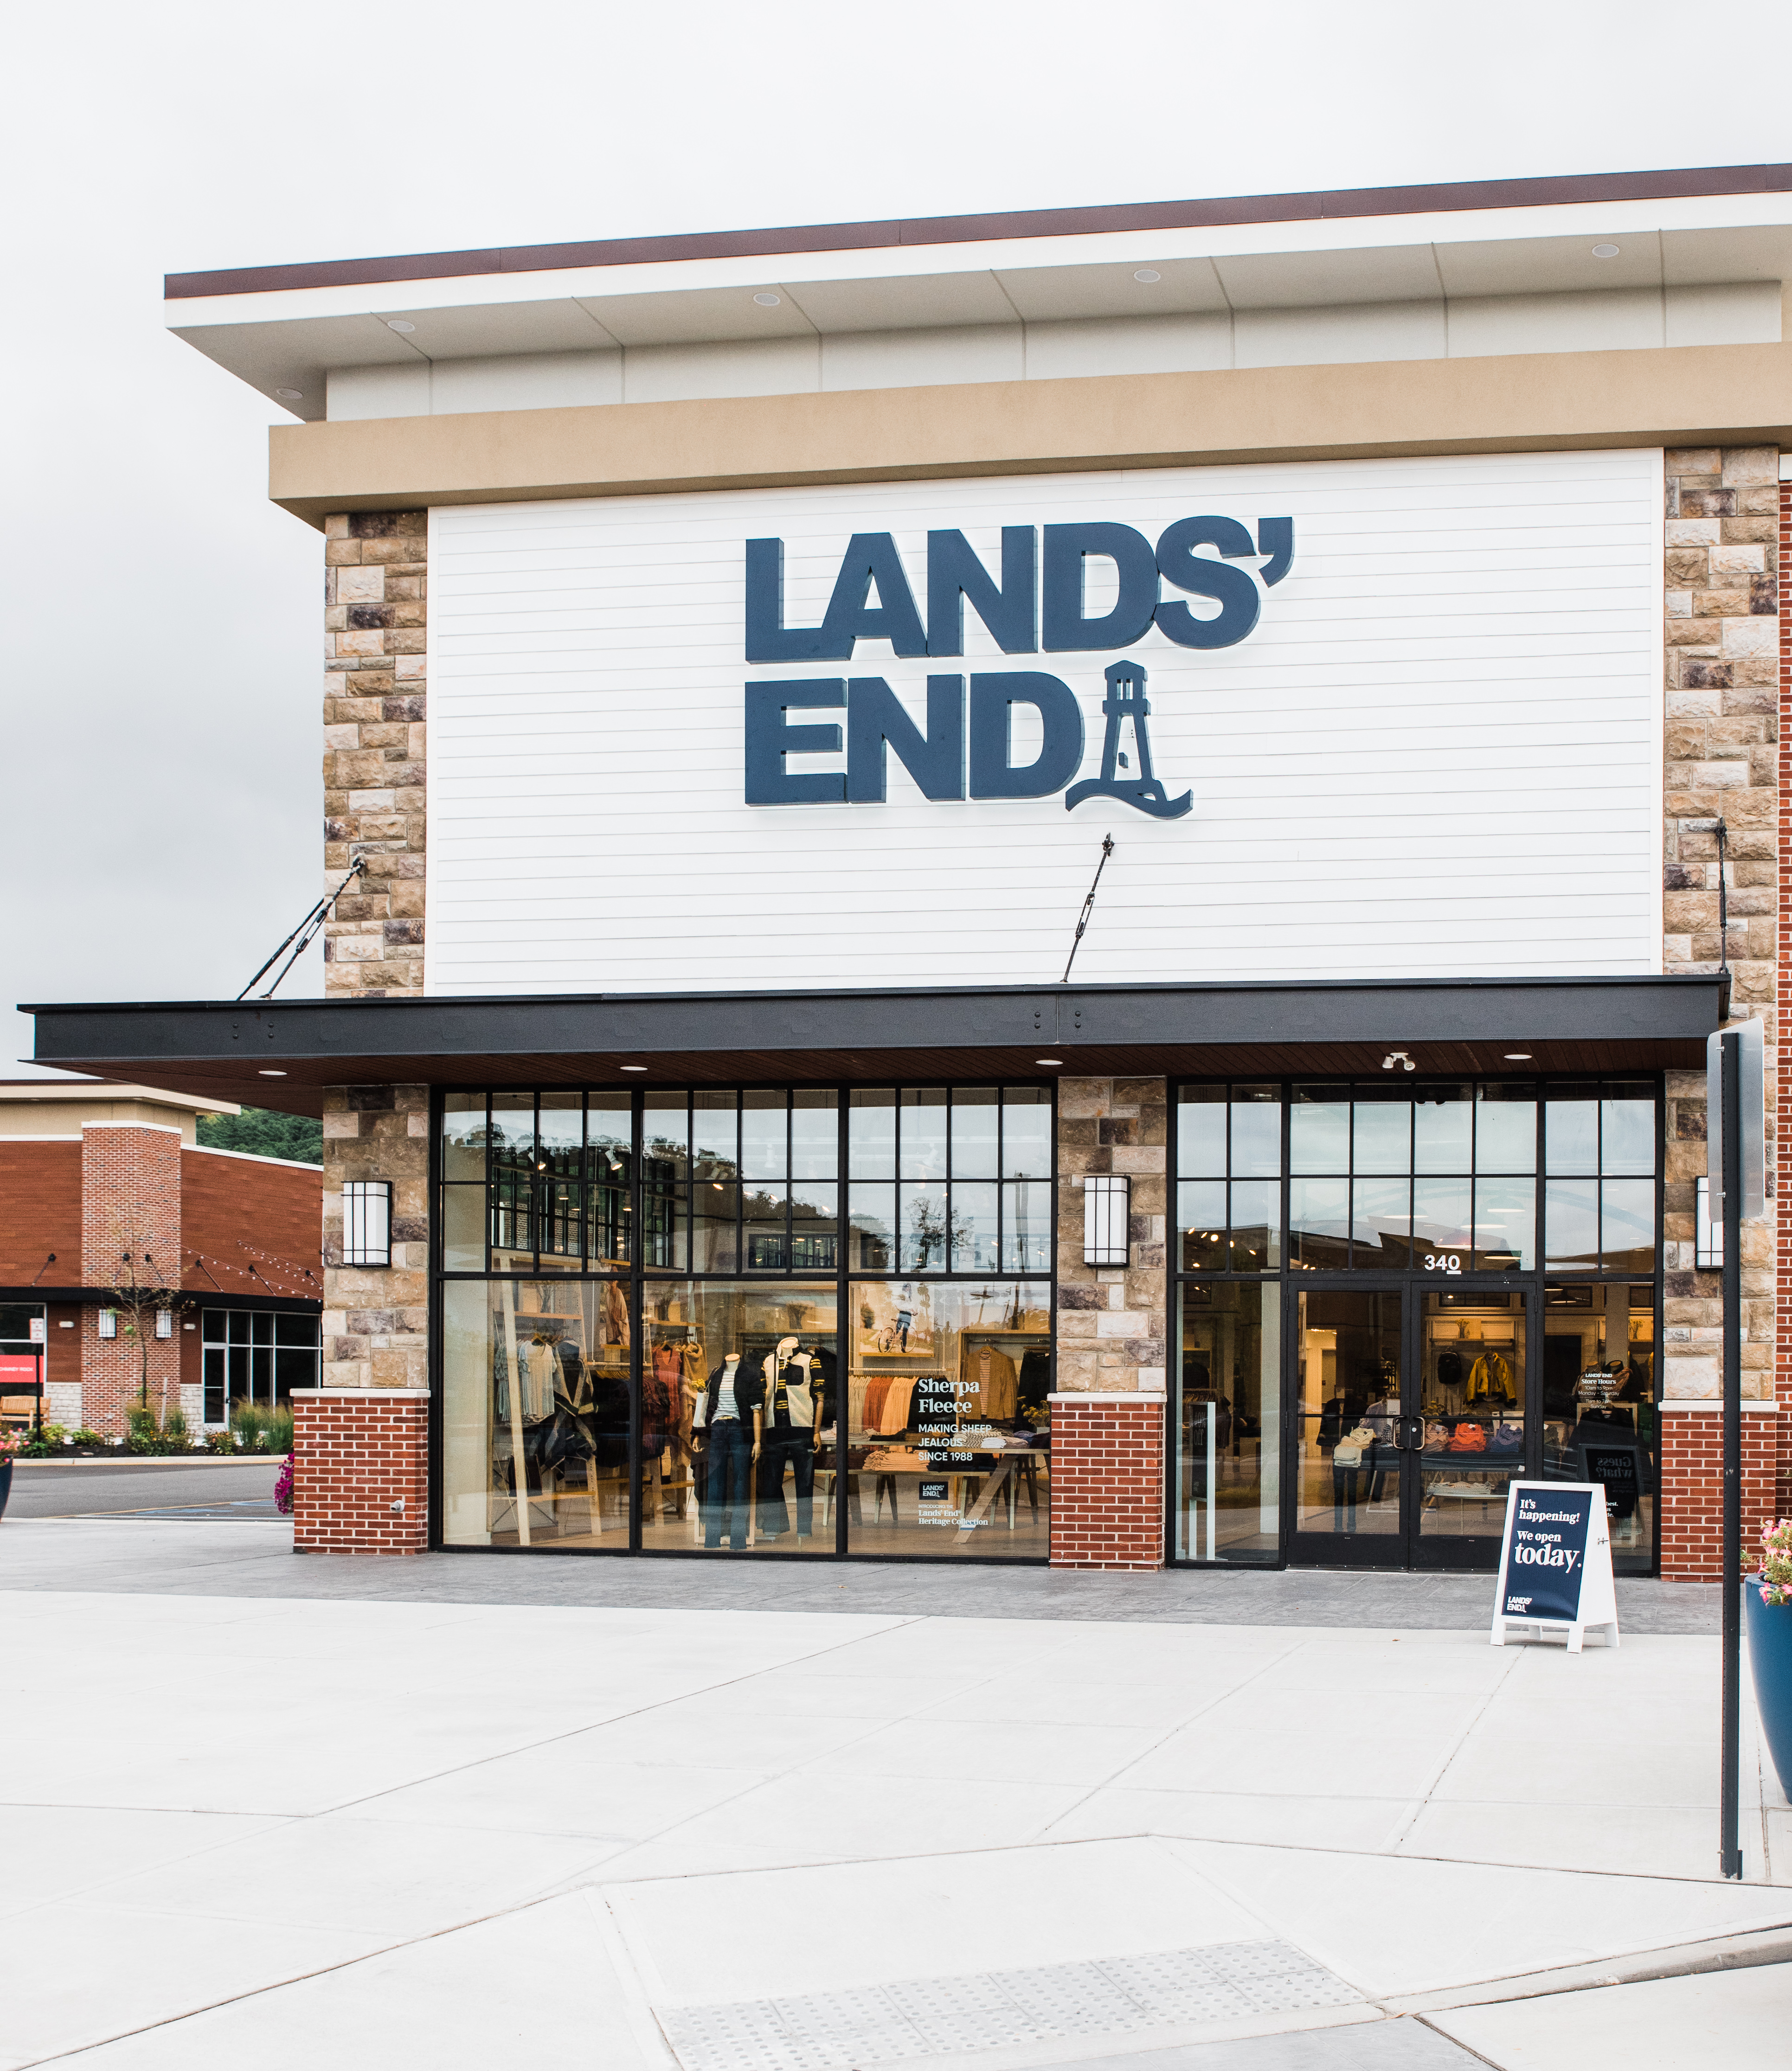 The CEO of Lands' End knows exactly who his customers are